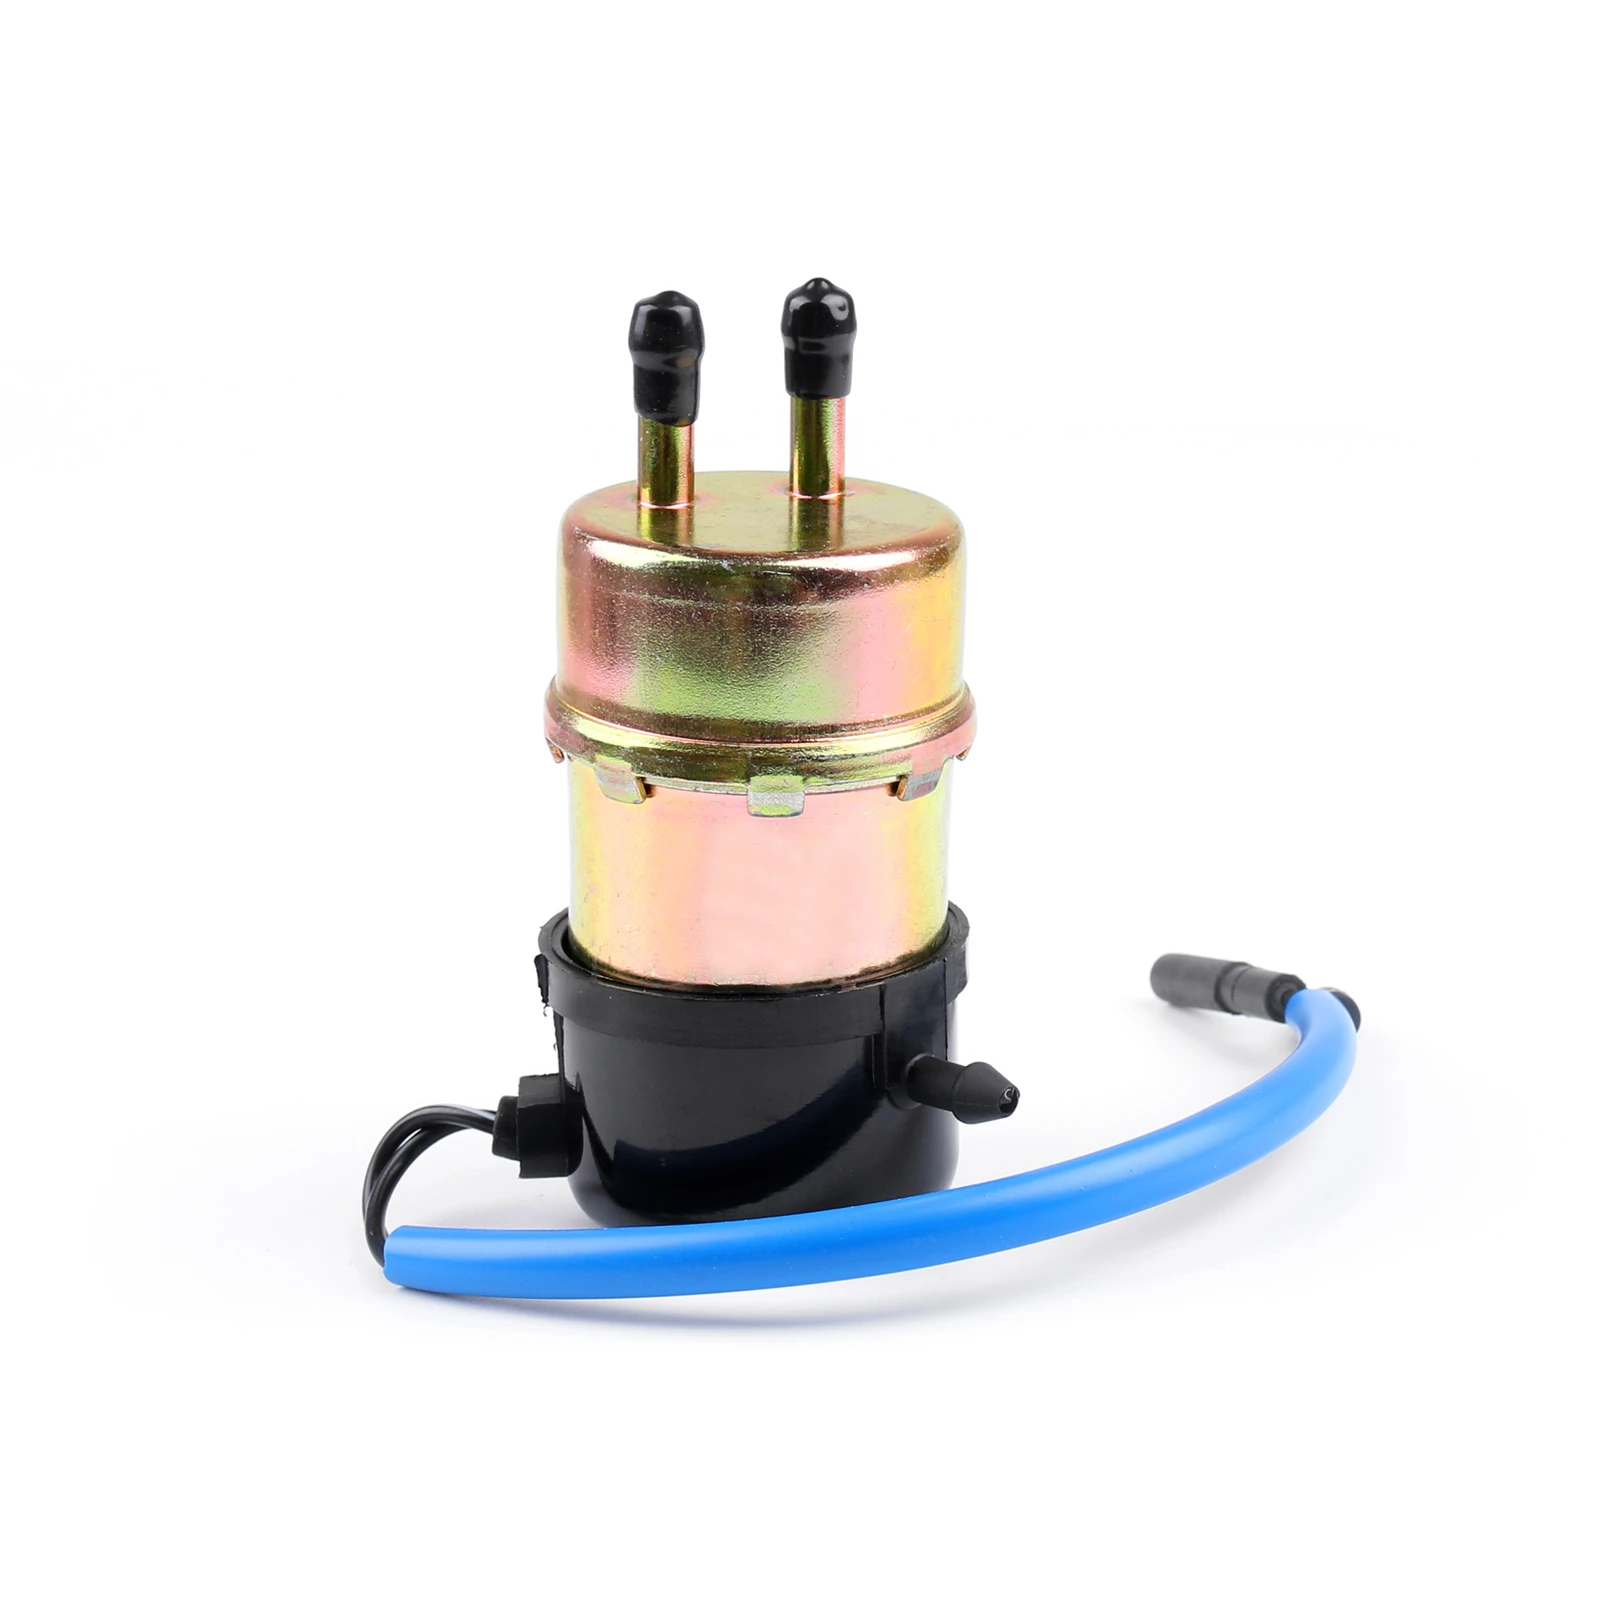 

Areyourshop New Fuel Pump Fit for YAMAHA V STAR 1998 1999 2000 2001 2002 2003 XVS650 and 1999 2000 2001 2002 2003 XVS1100